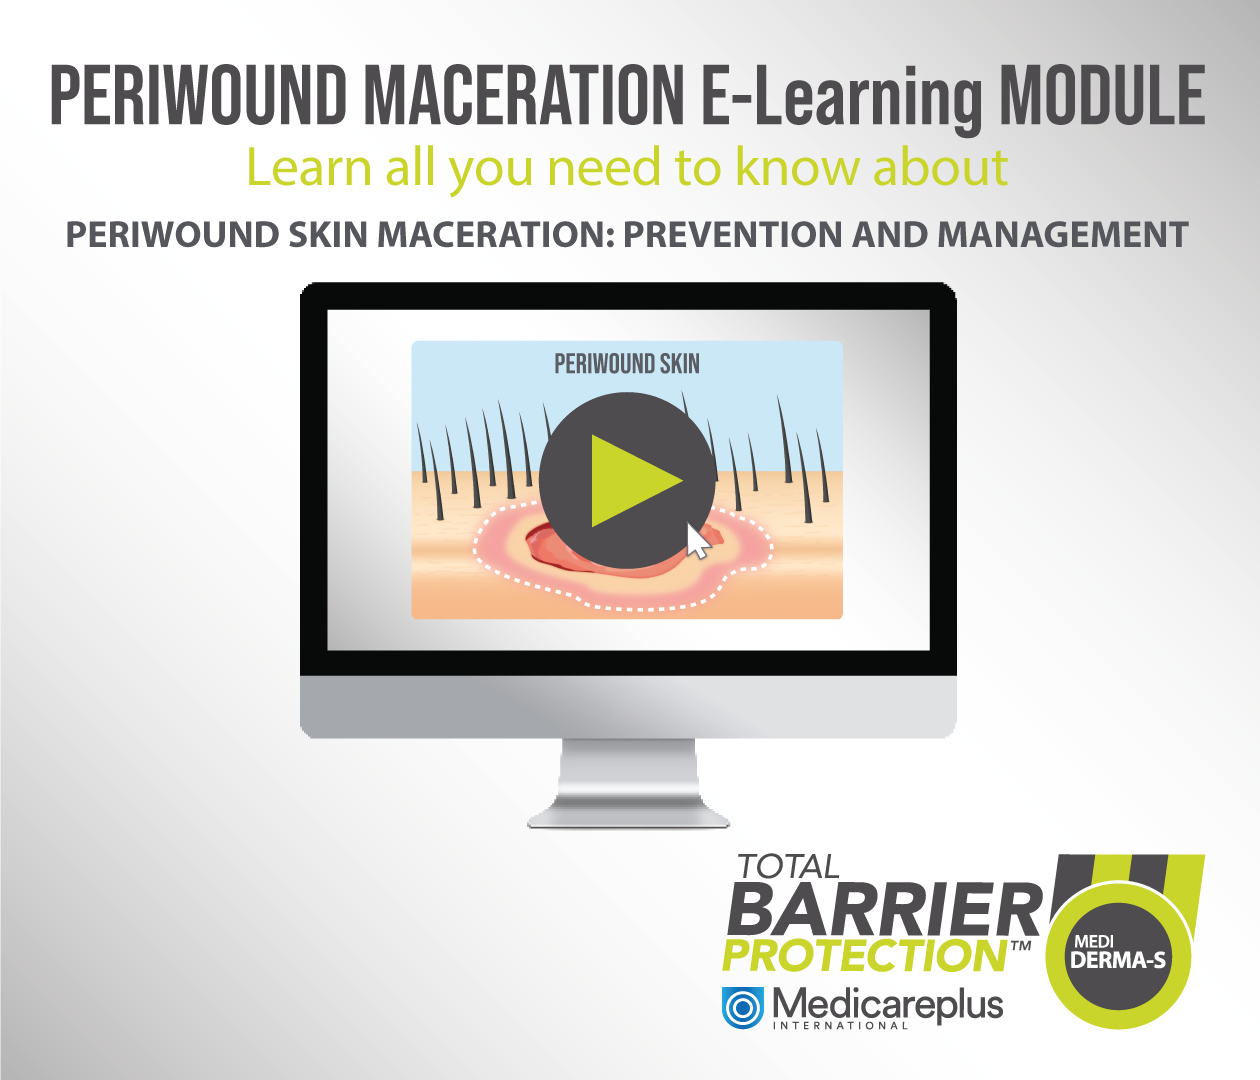 Periwound skin maceration: prevention and management